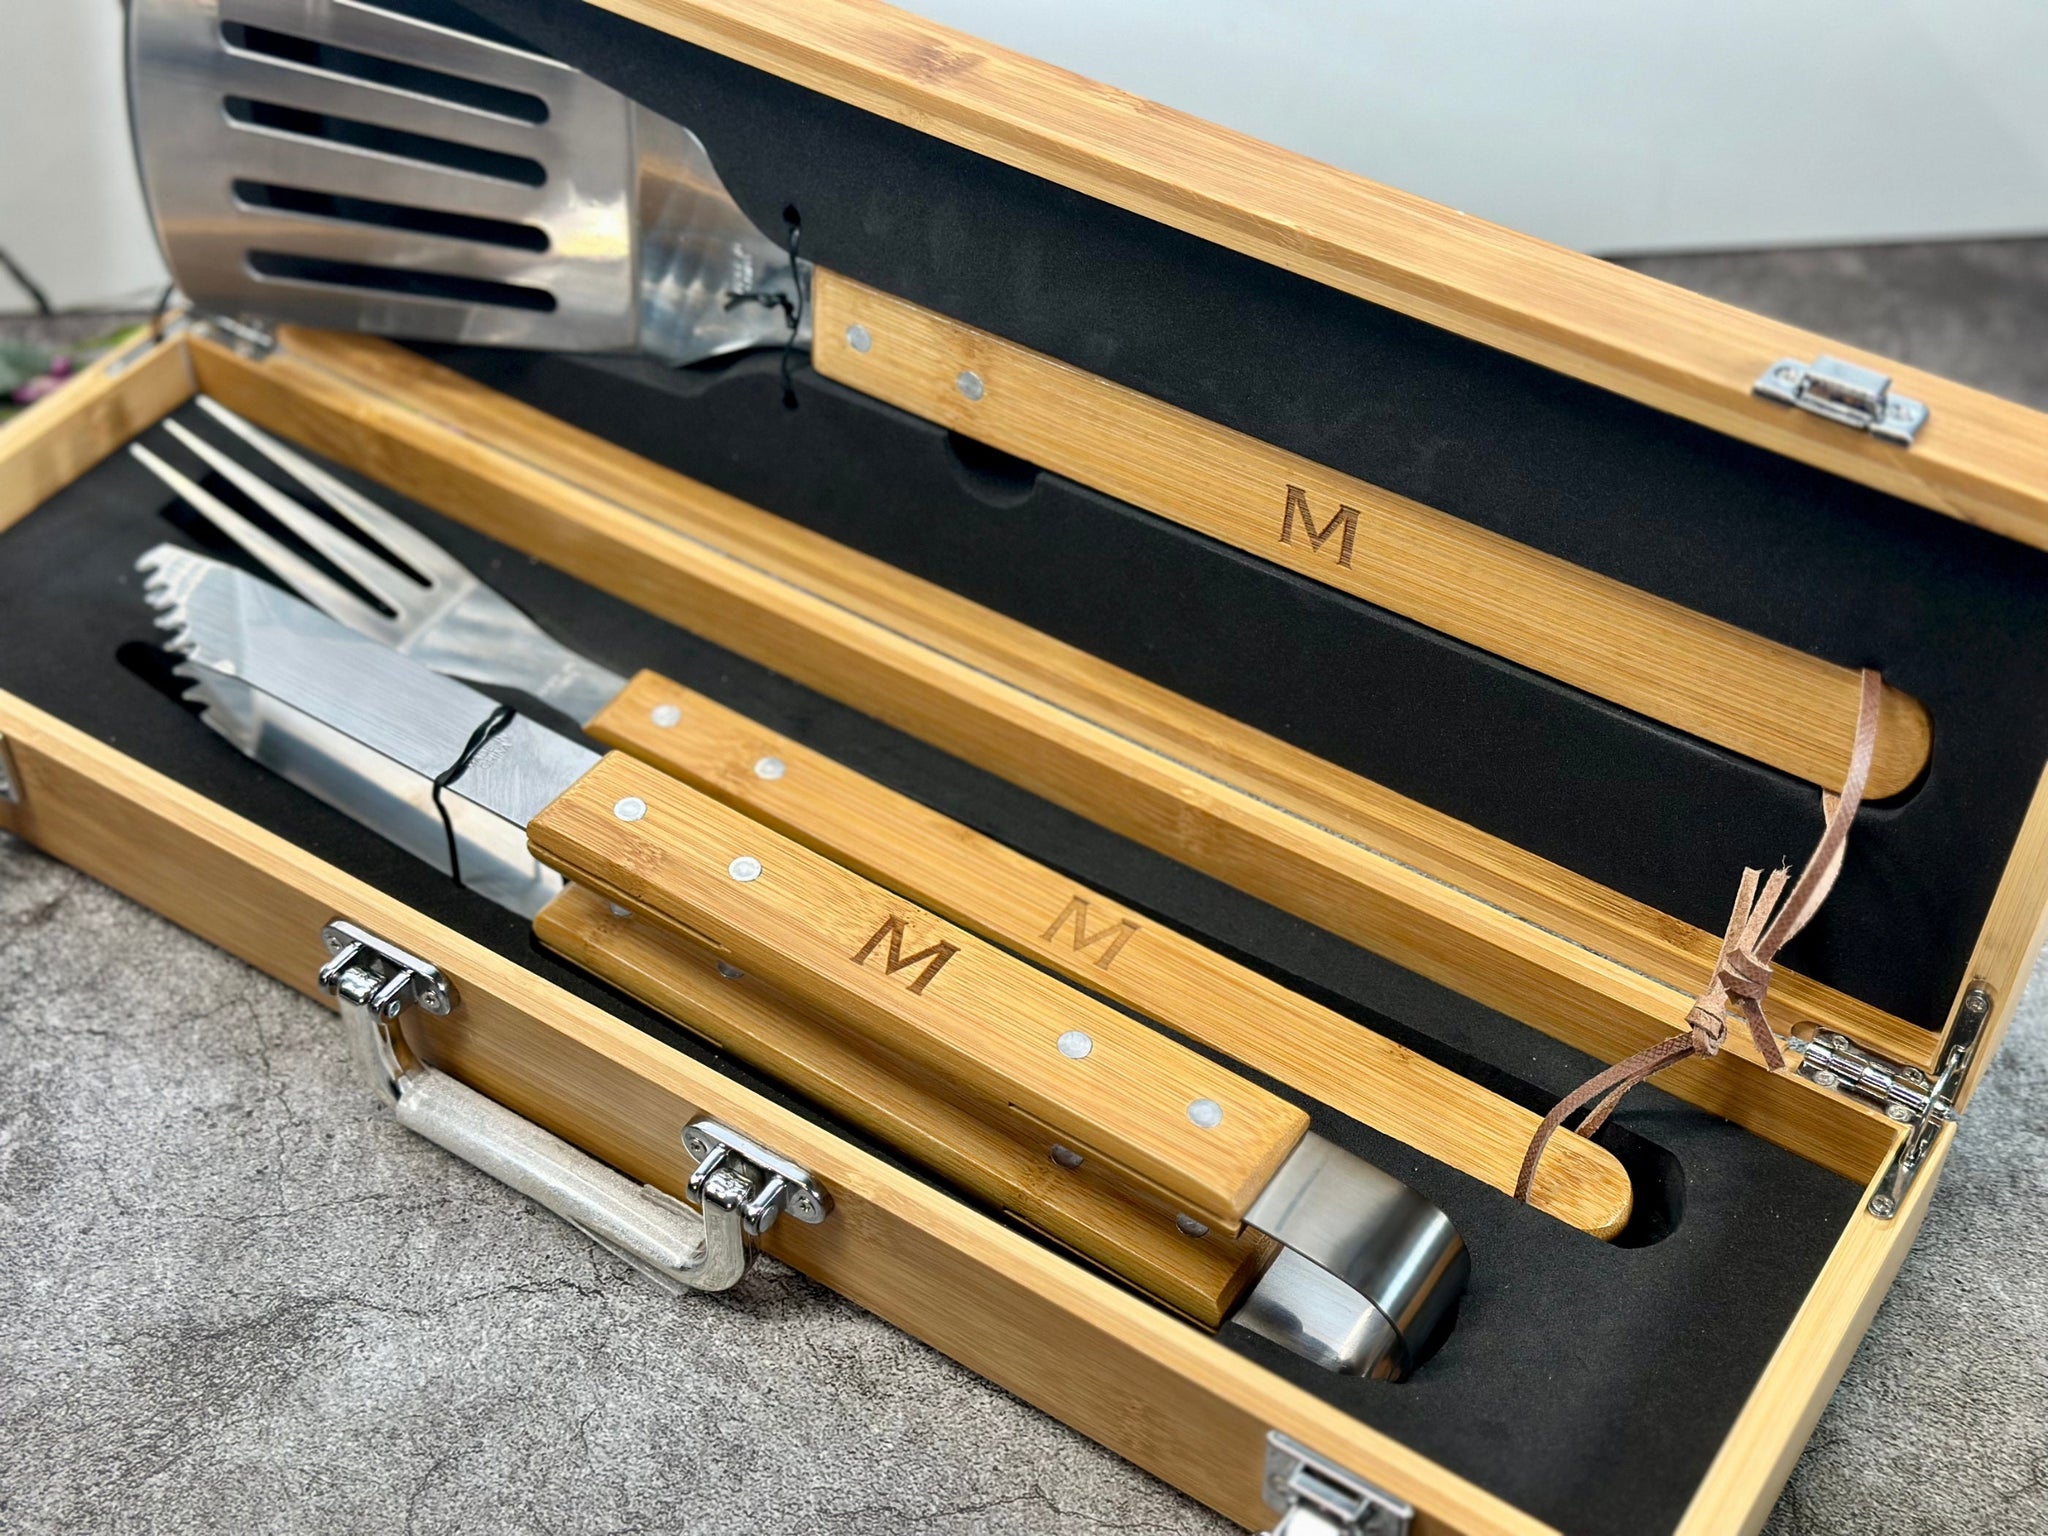 Personalized Grill Set, Gift for Dad, Husband, BBQ Set, Grilling Gifts for Men, Grill Tool Set, Engraved Grill Set, Grill Tool Kit, gIFT